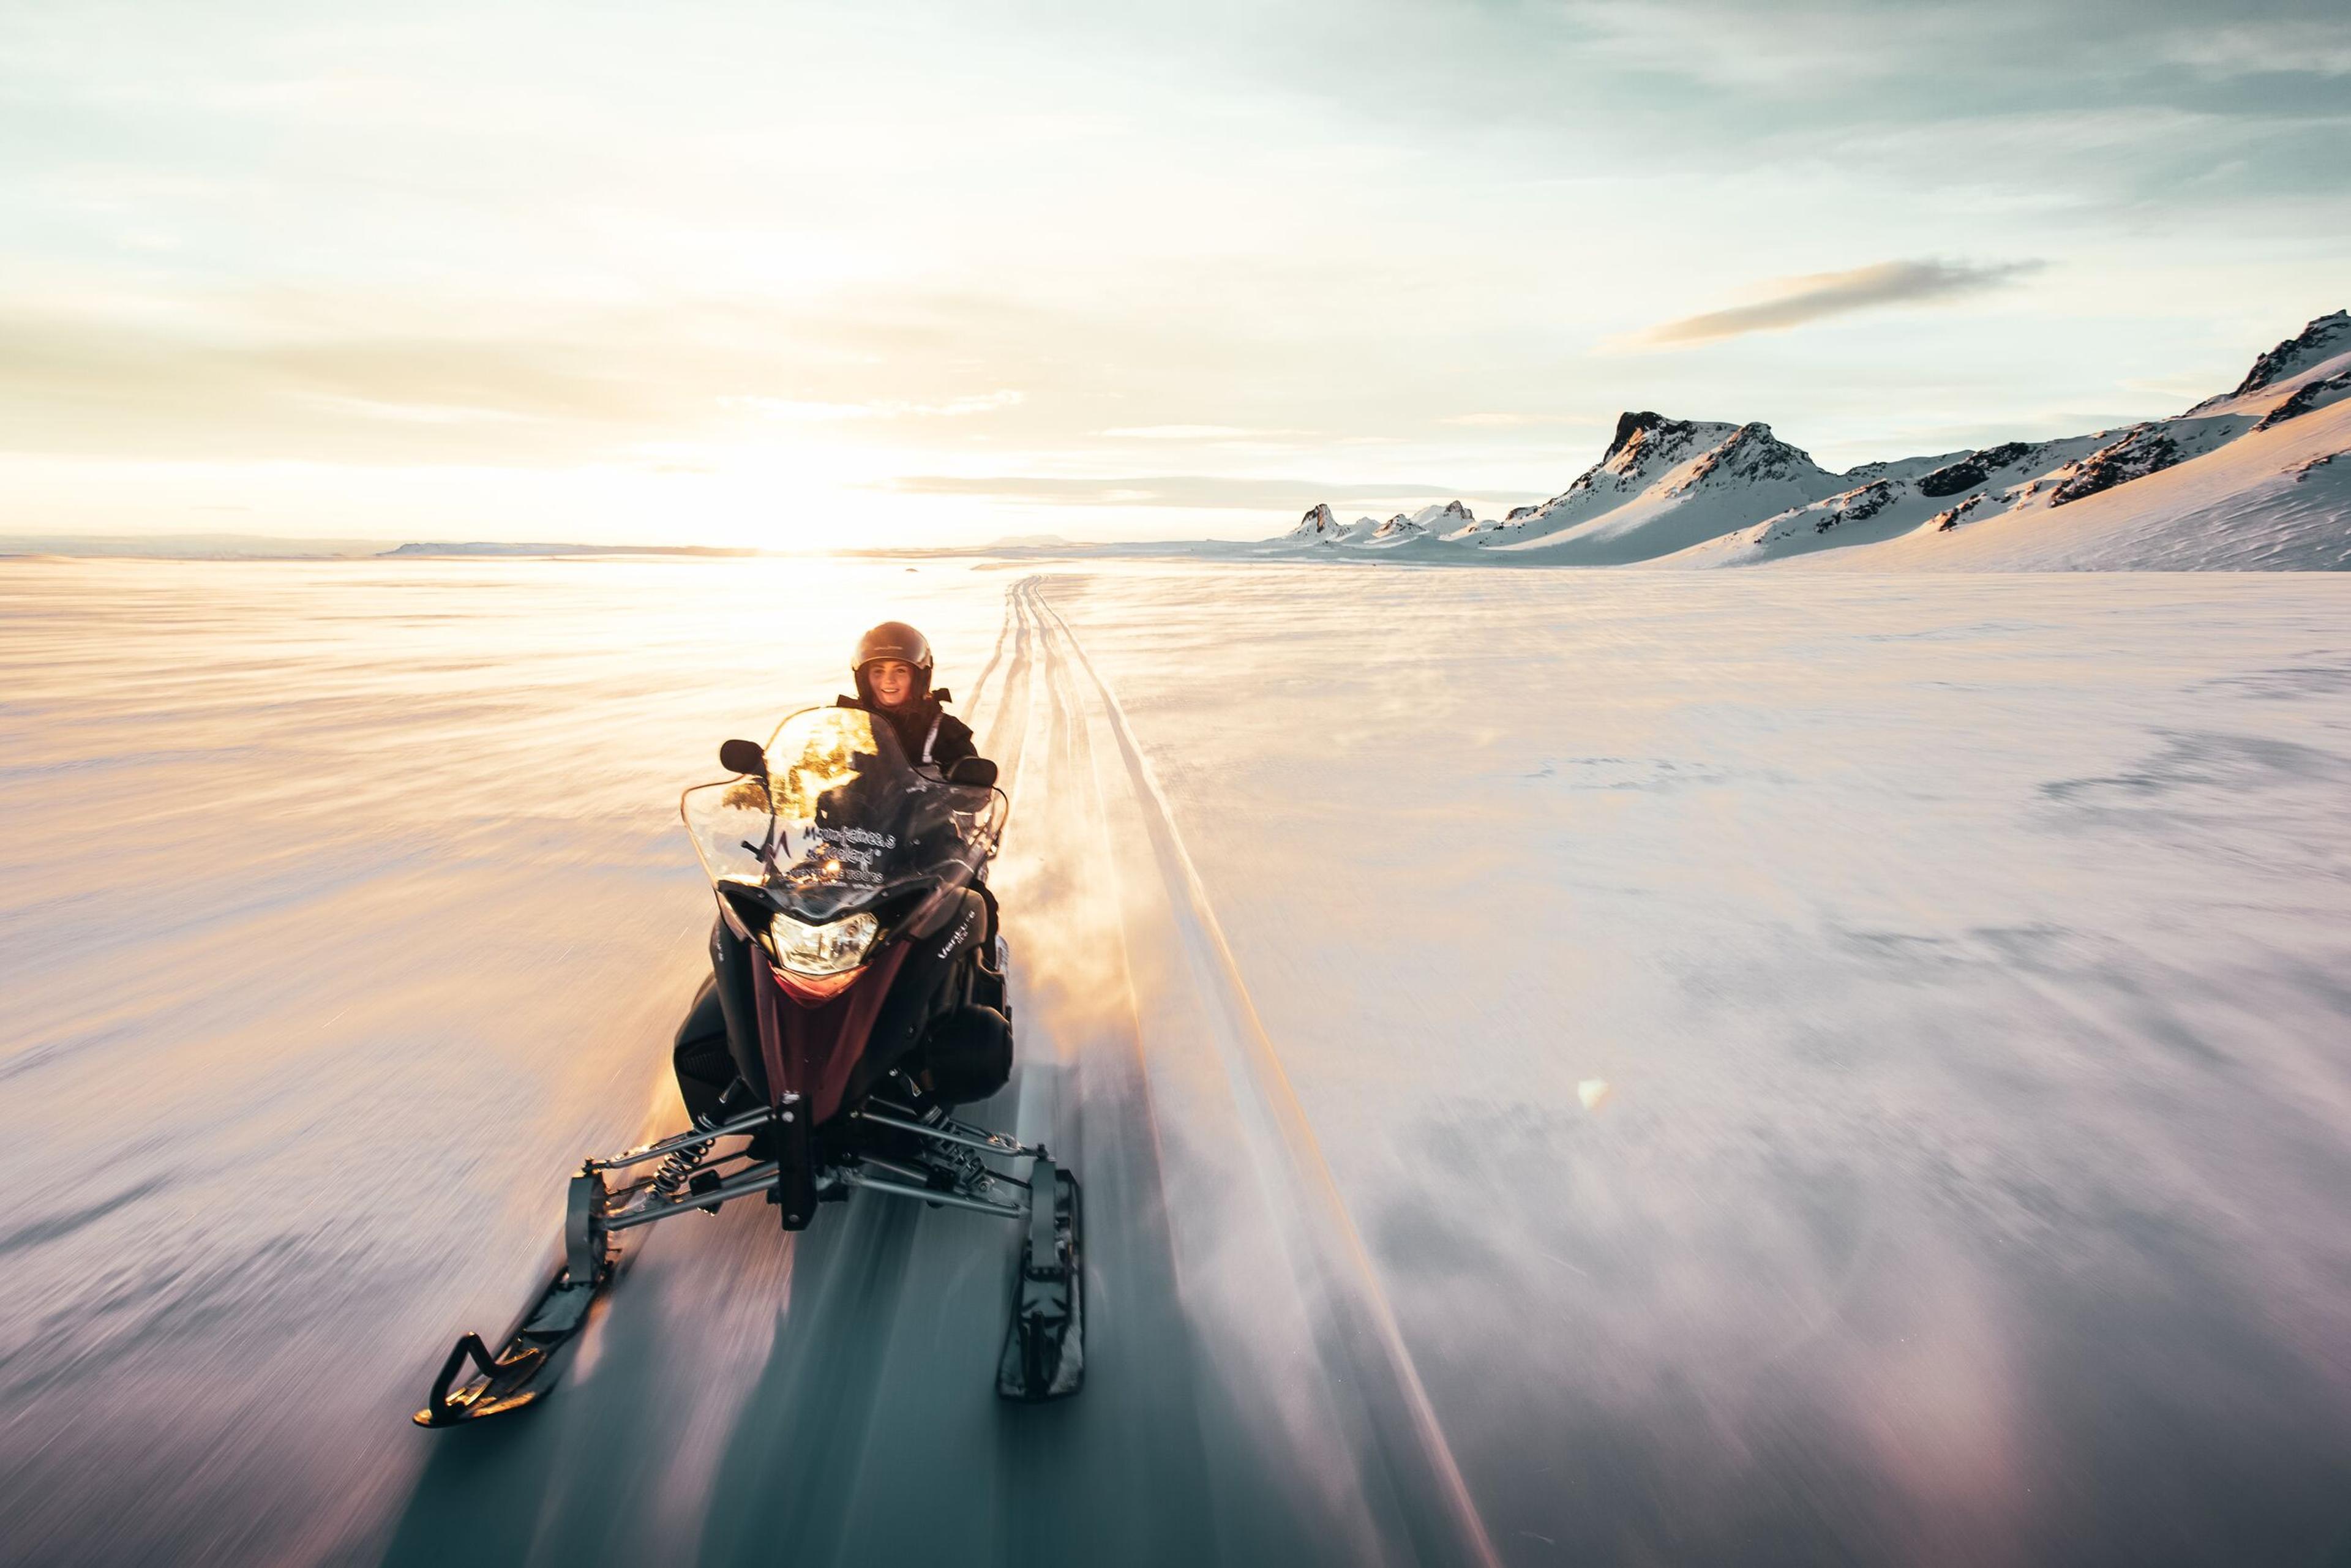 A person riding a snowmobile on a glacier during sunset